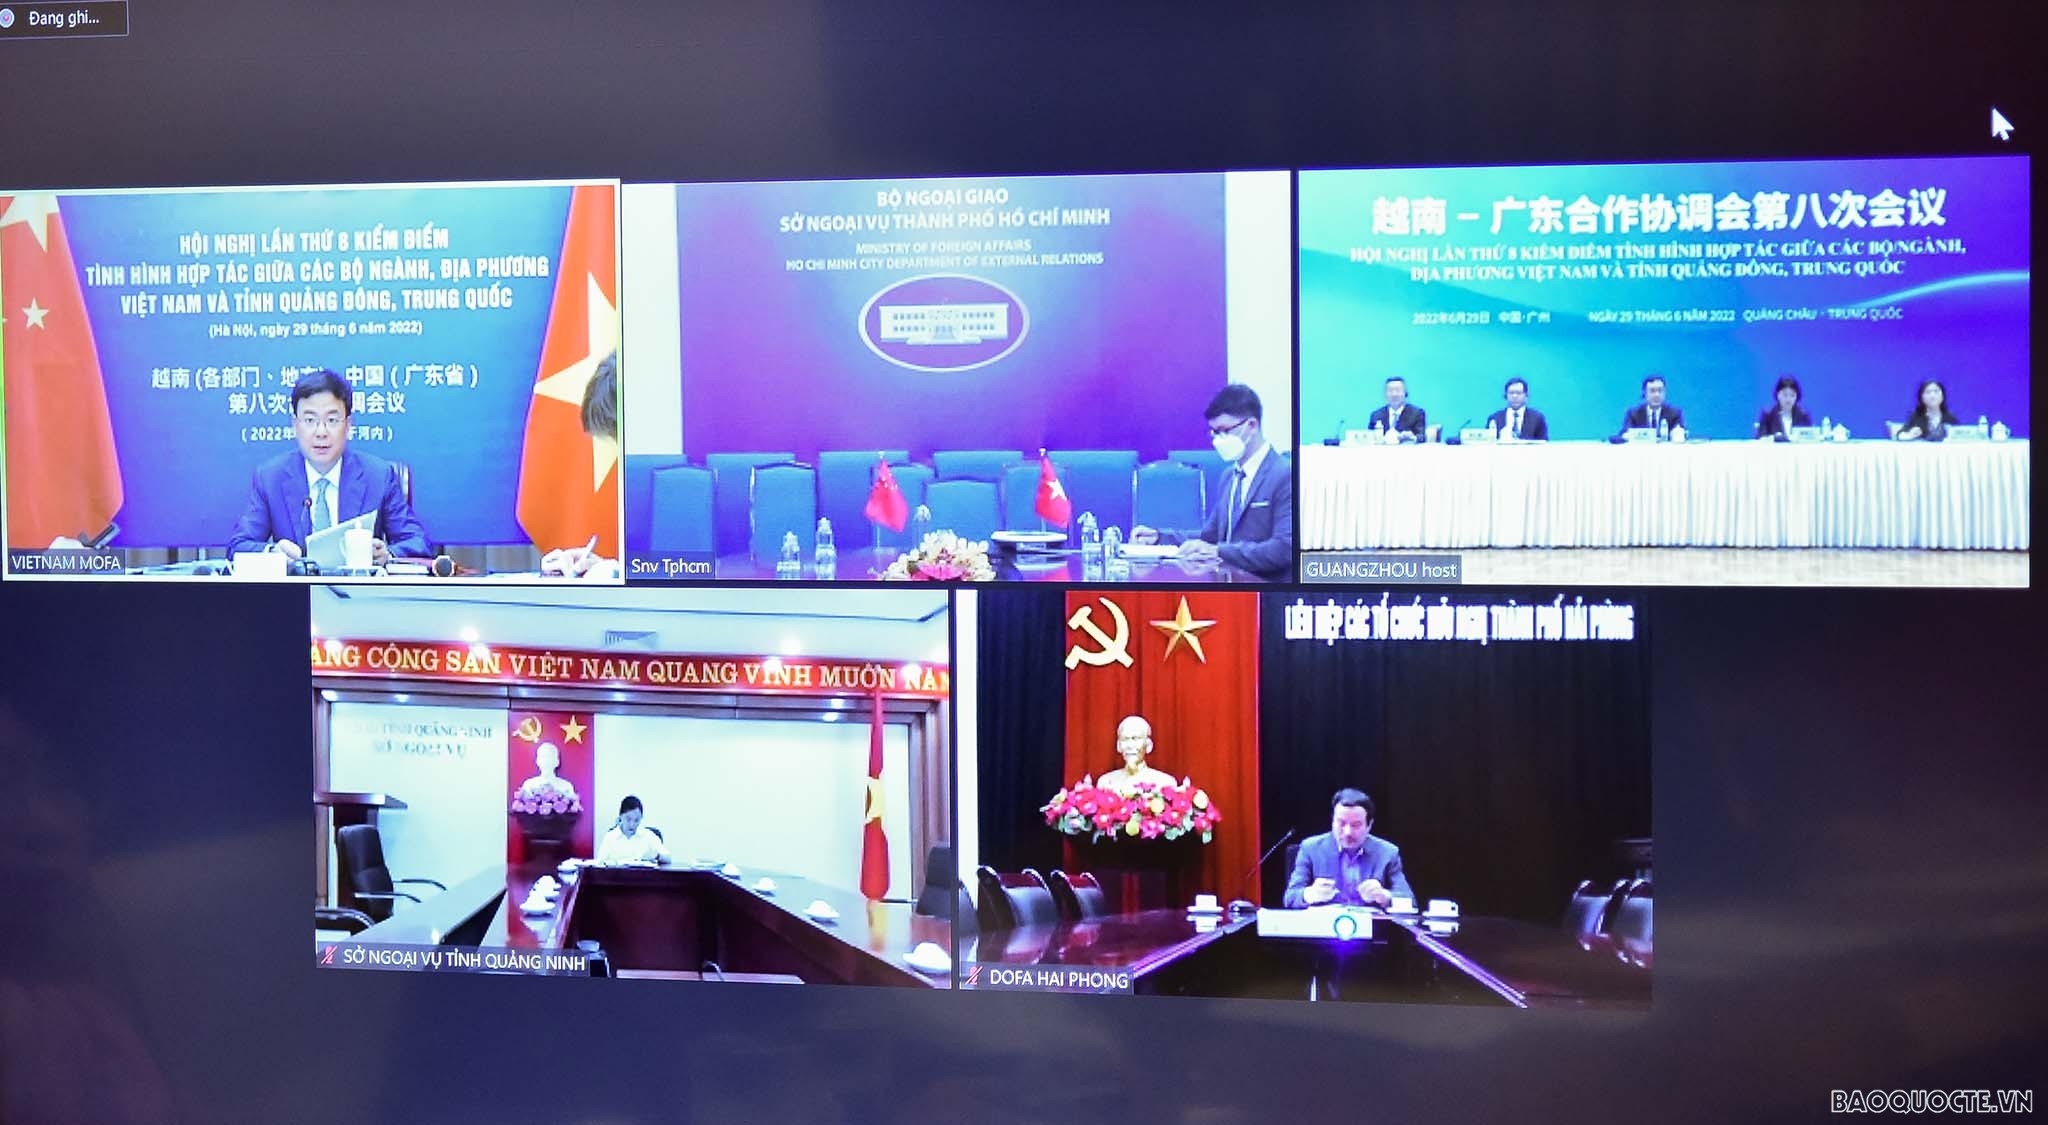 Conference to promote cooperation between Vietnam localities-Guangdong province